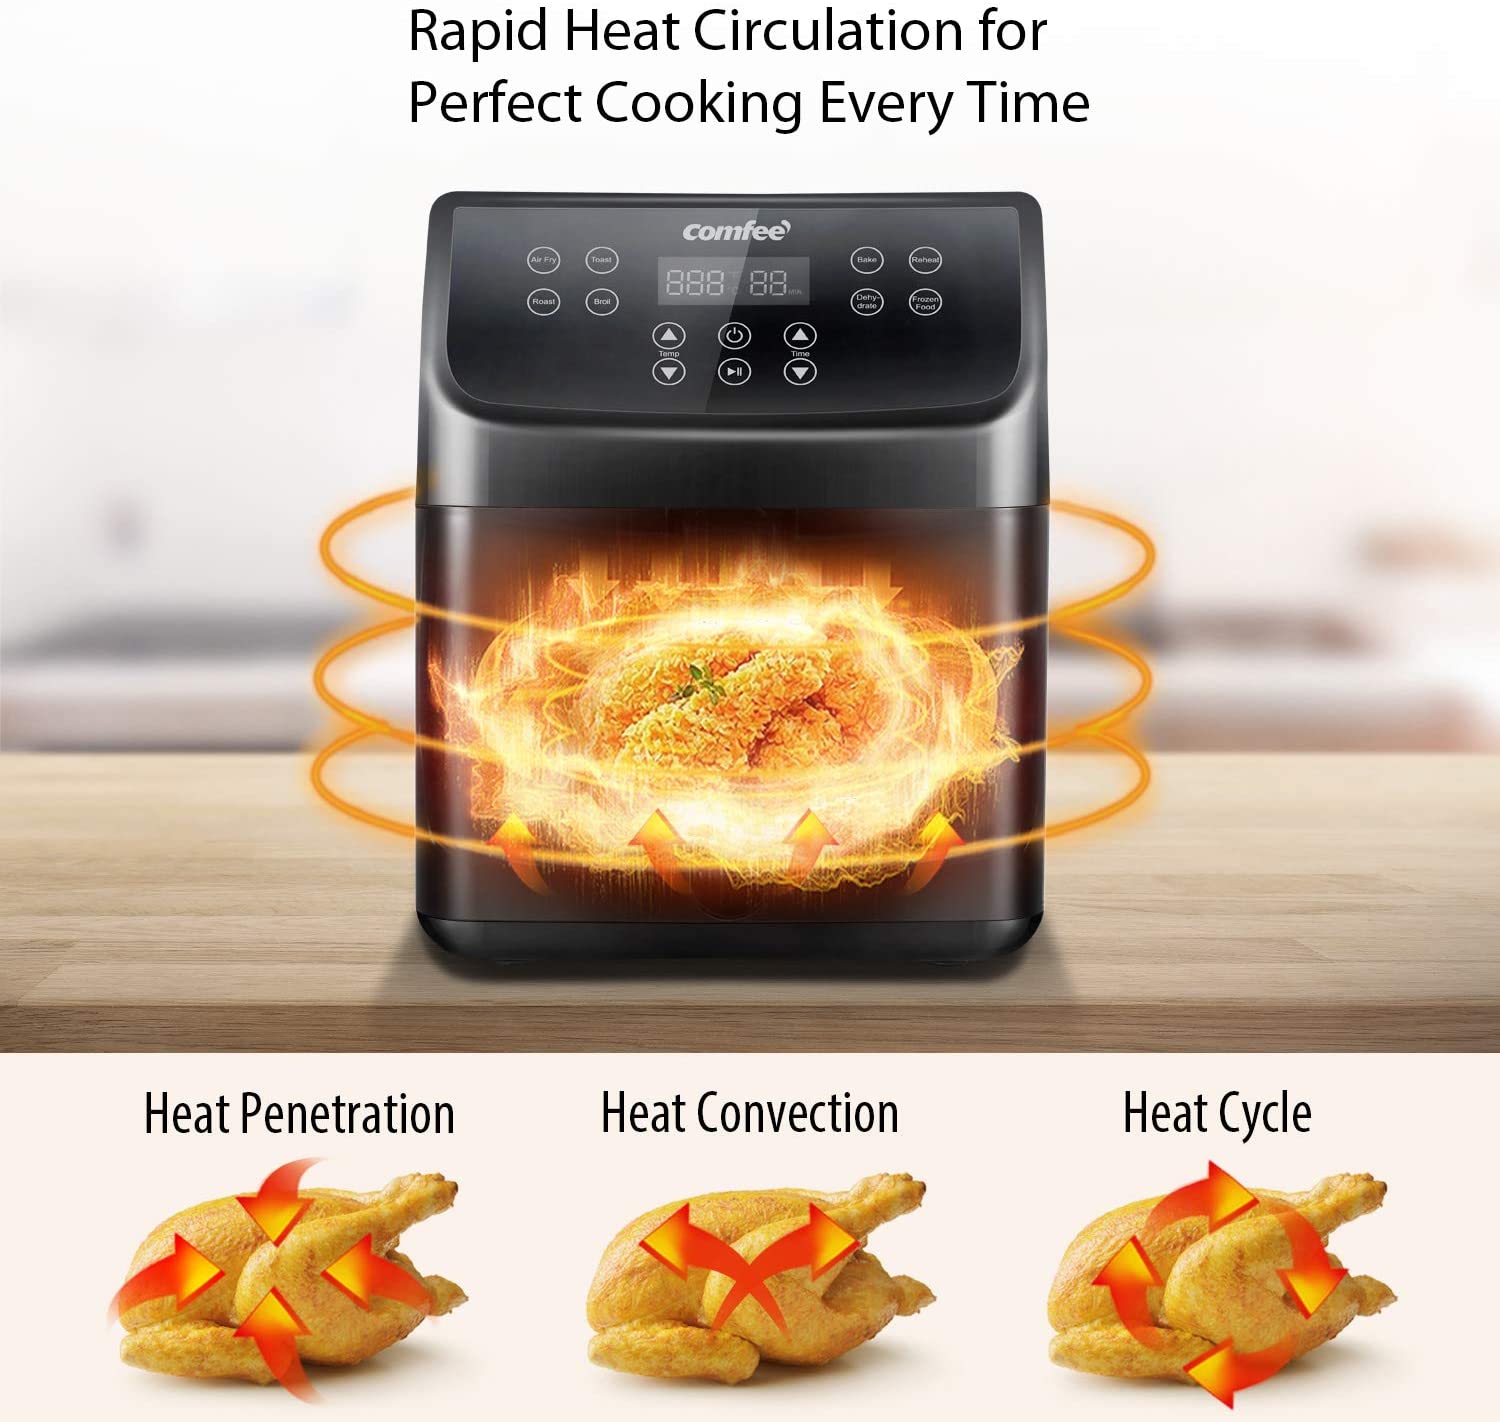 Comfee' Air Fry Toaster Oven